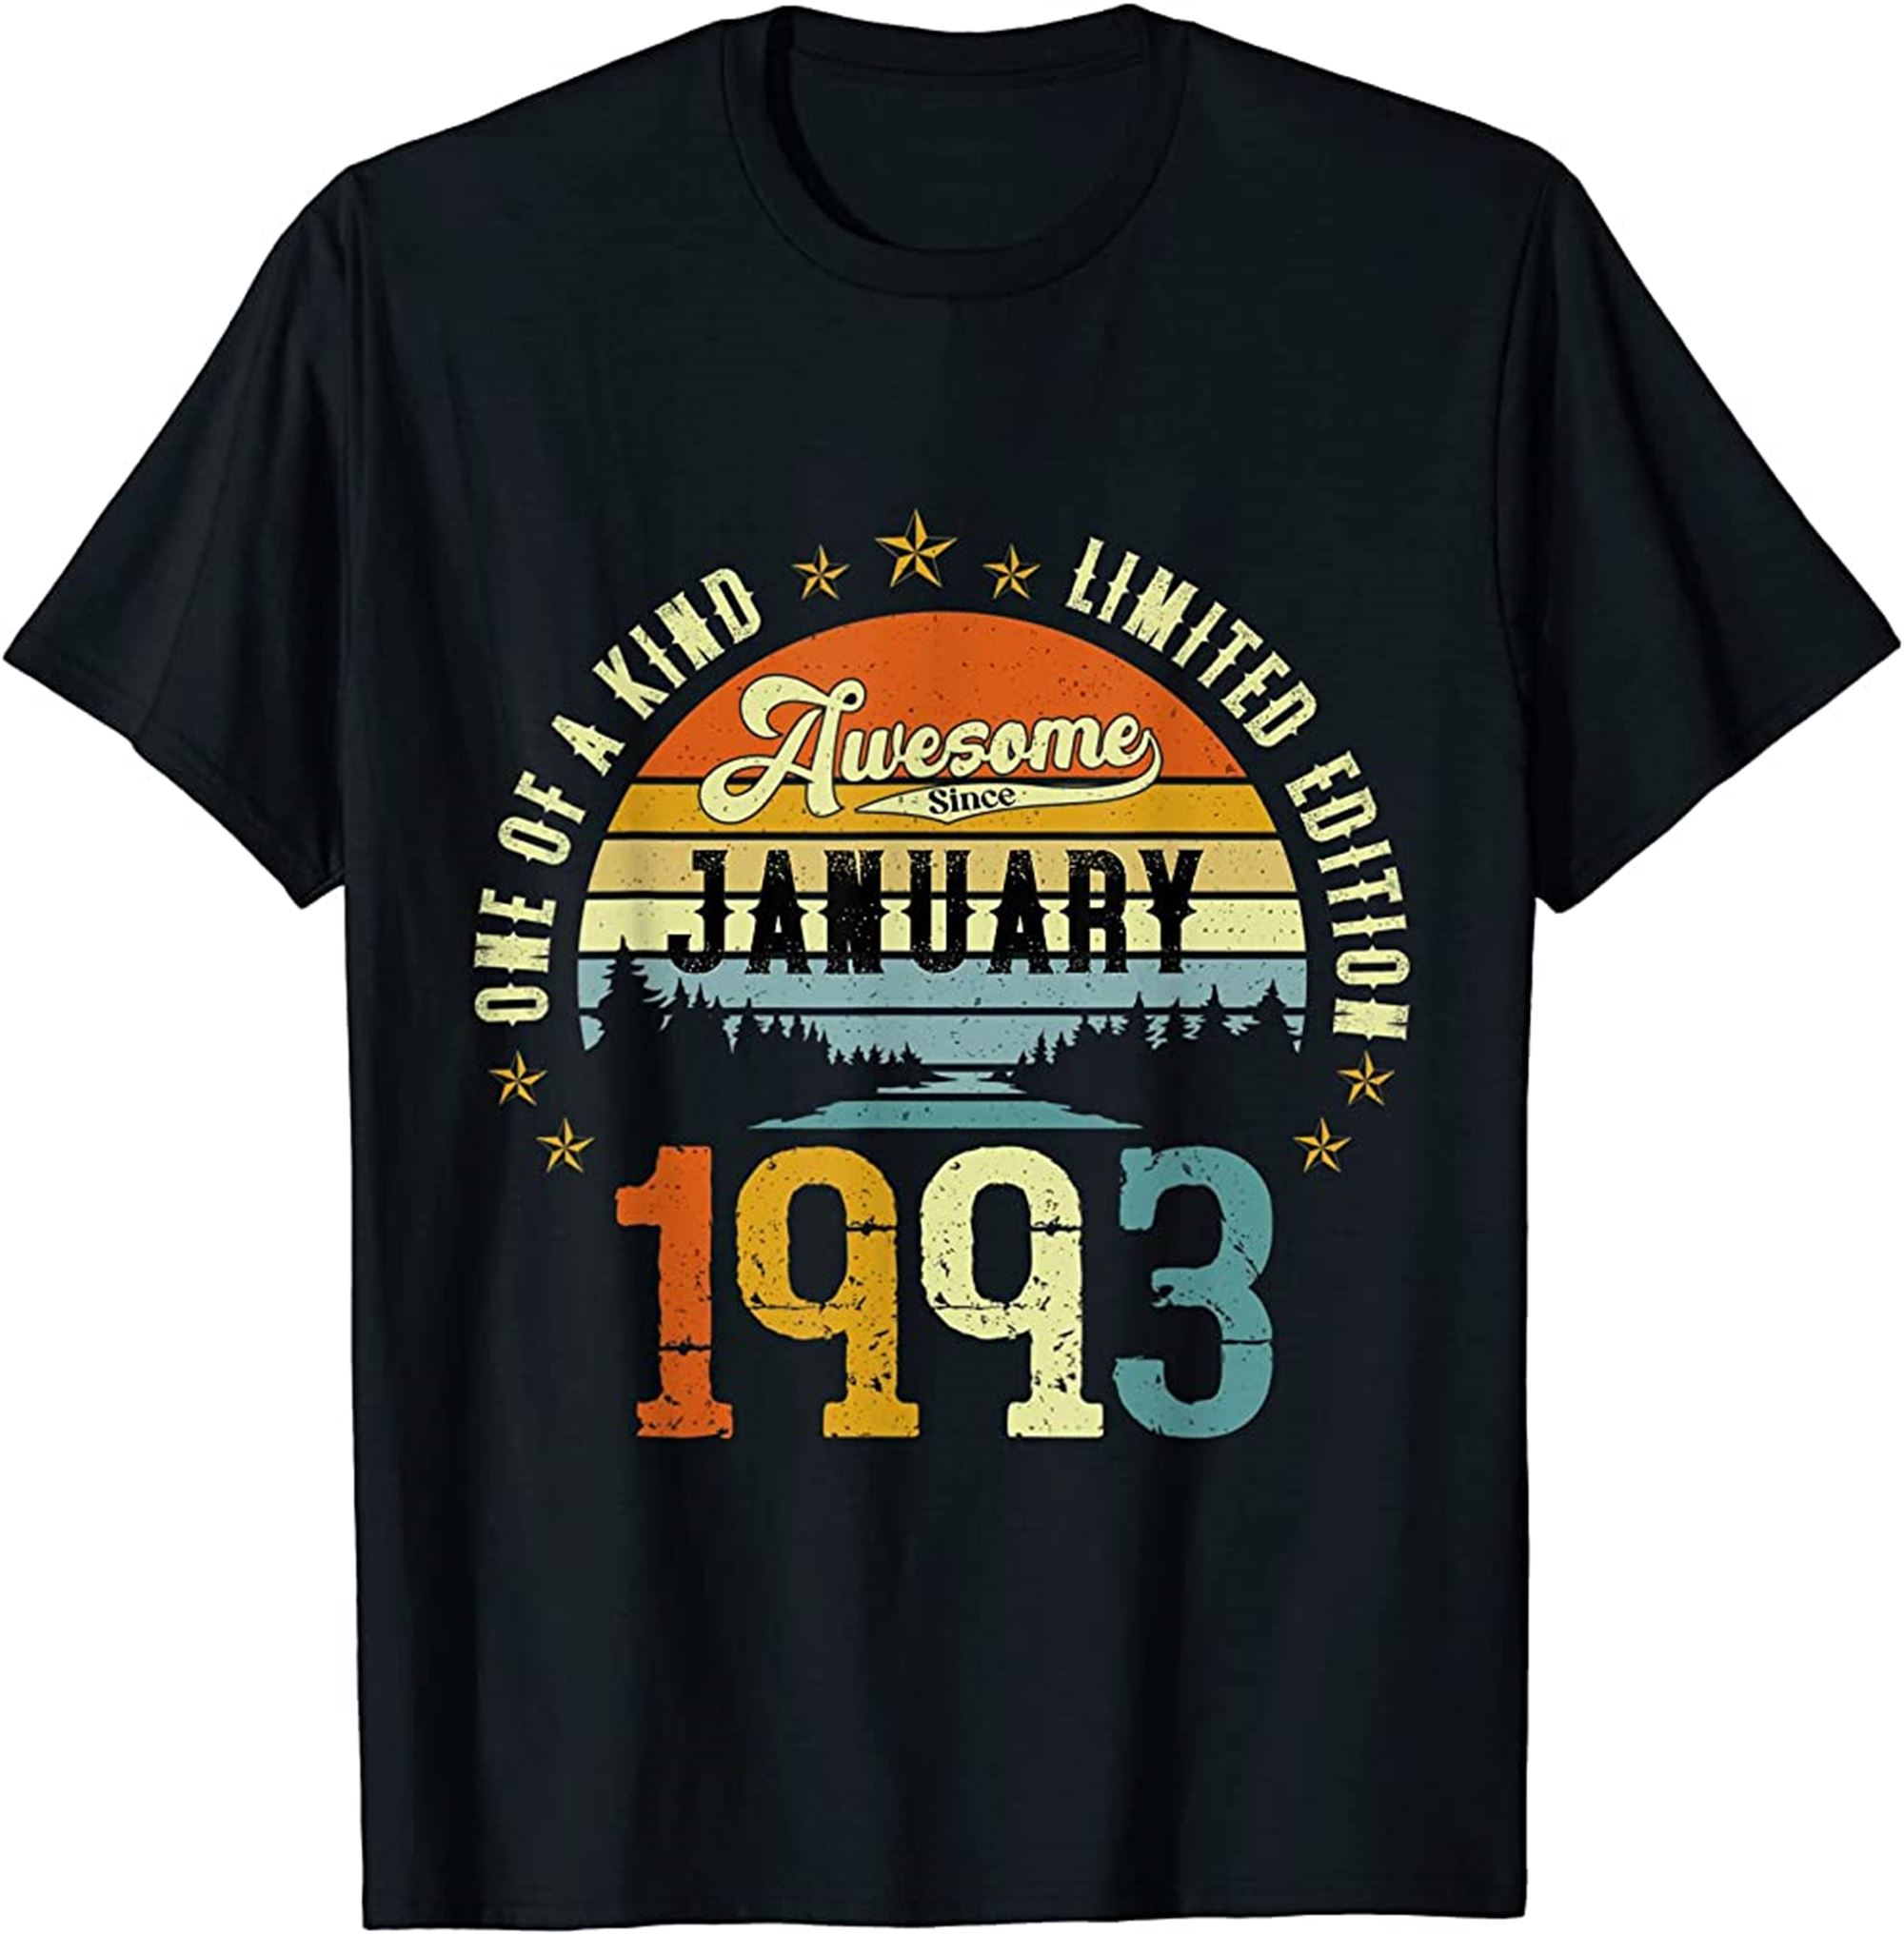 Awesome Since January 1993 Vintage 29th Birthday T-shirt Full Size Up To 5xl